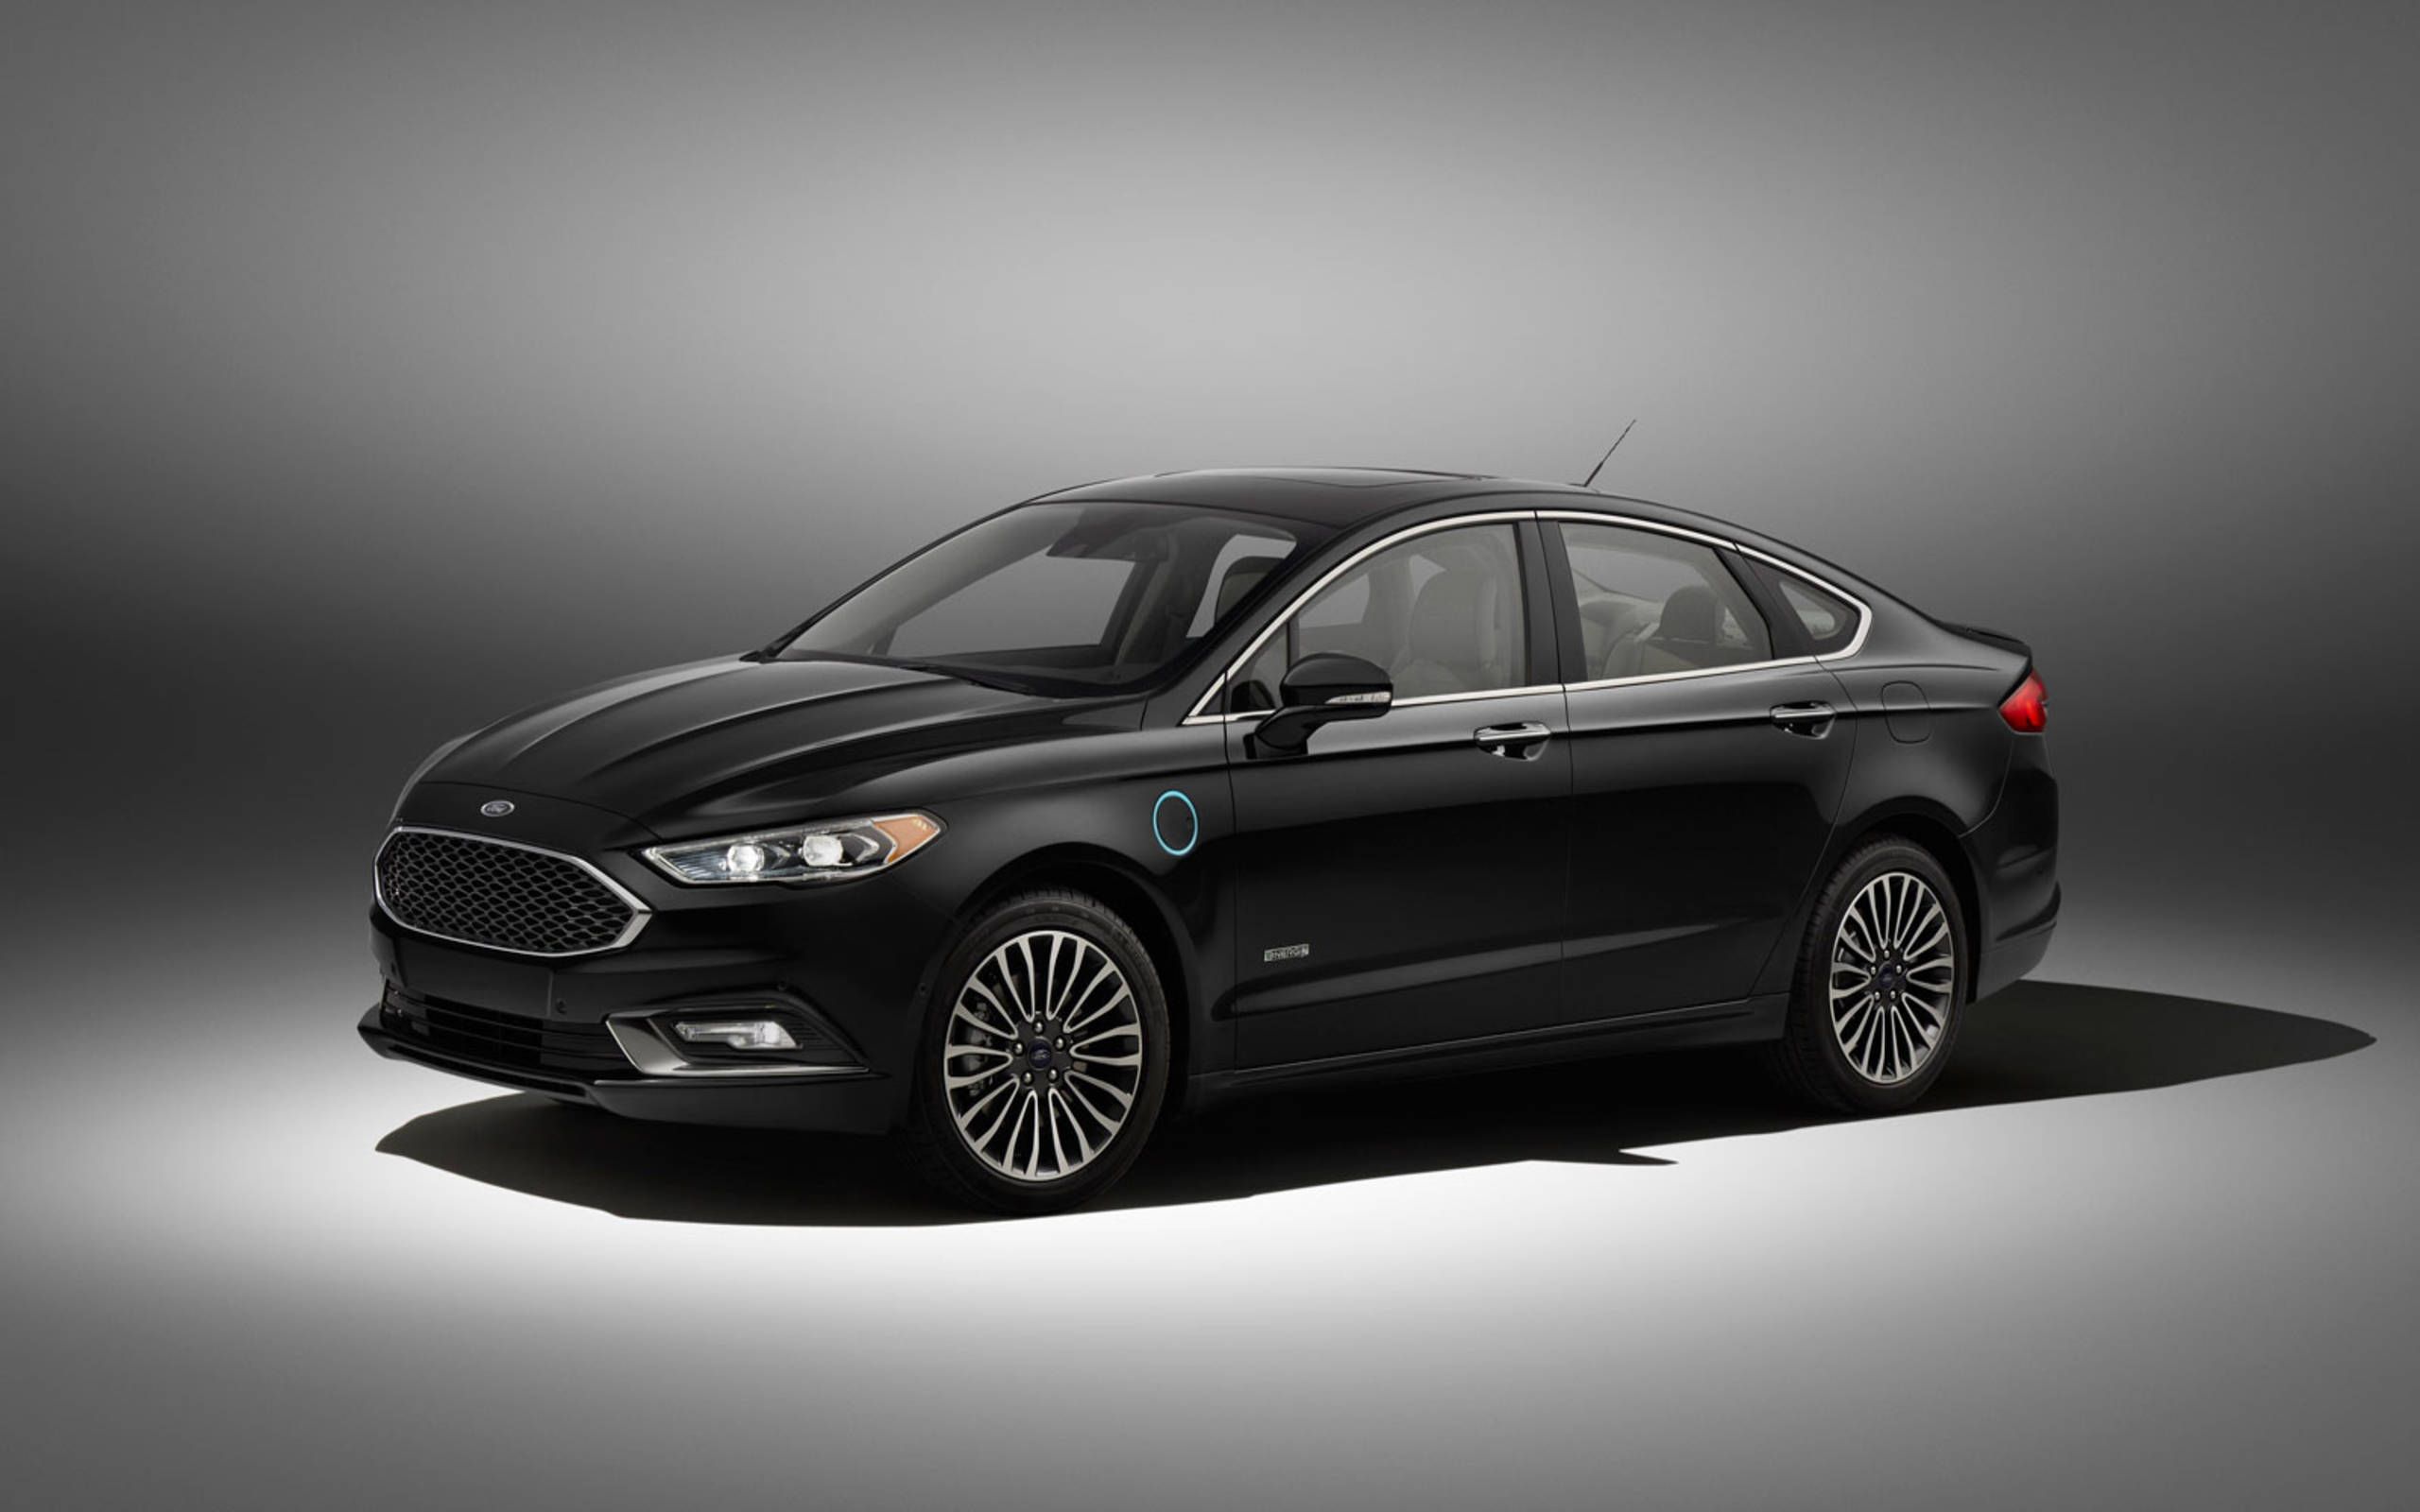 2017 Ford Fusion Hybrid Review & Ratings